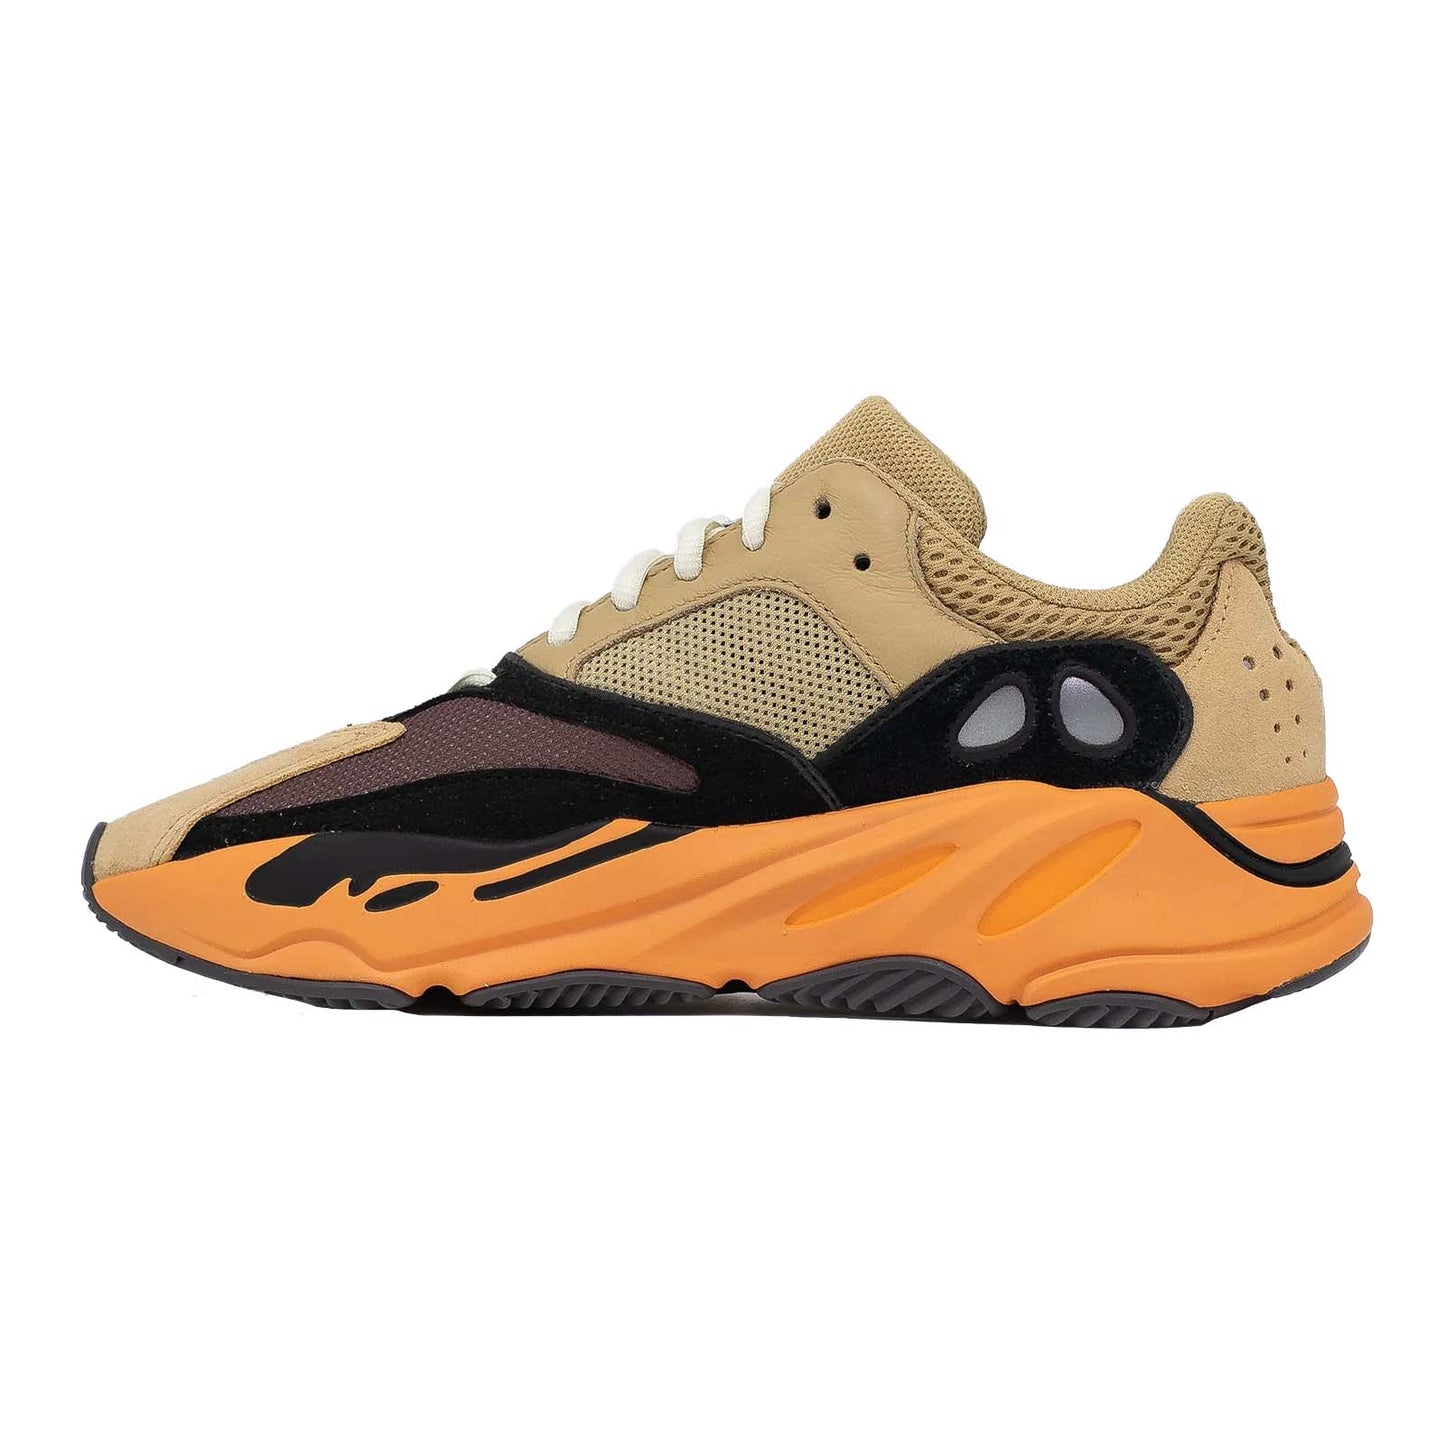 Yeezy Boost 700, Enflame Amber